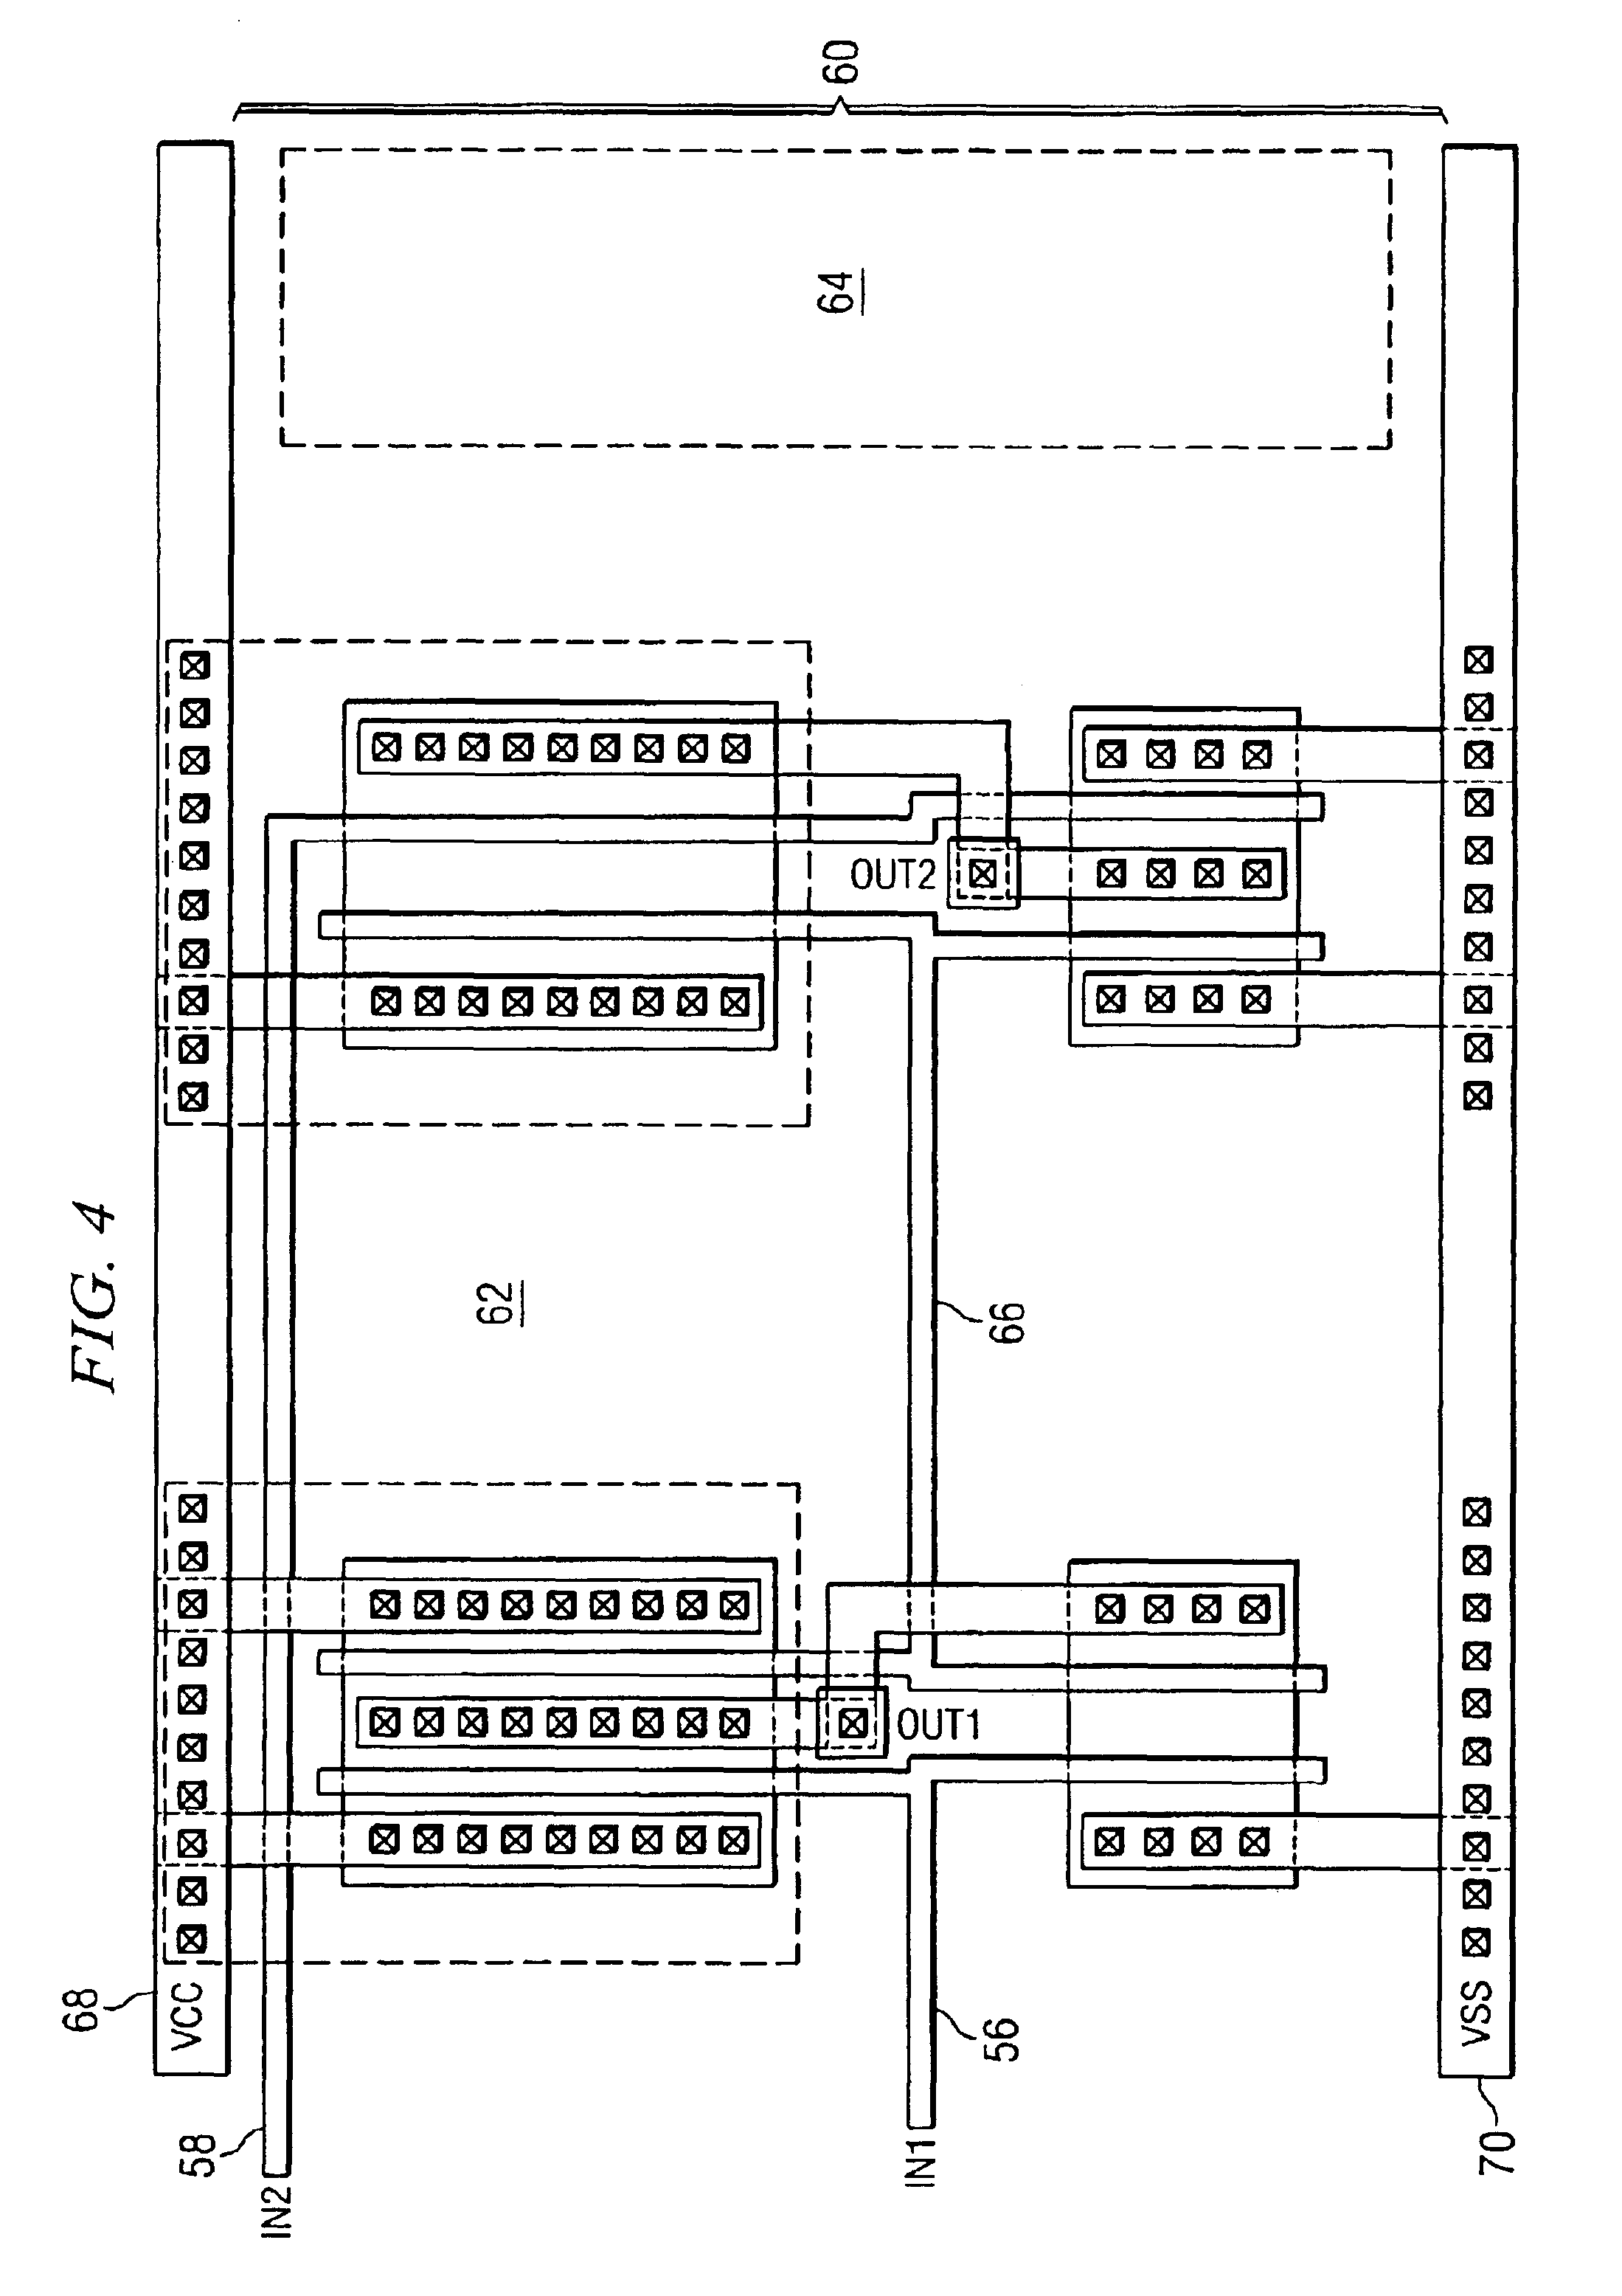 Photomask for reducing power supply voltage fluctuations in an integrated circuit and integrated circuit manufactured with the same